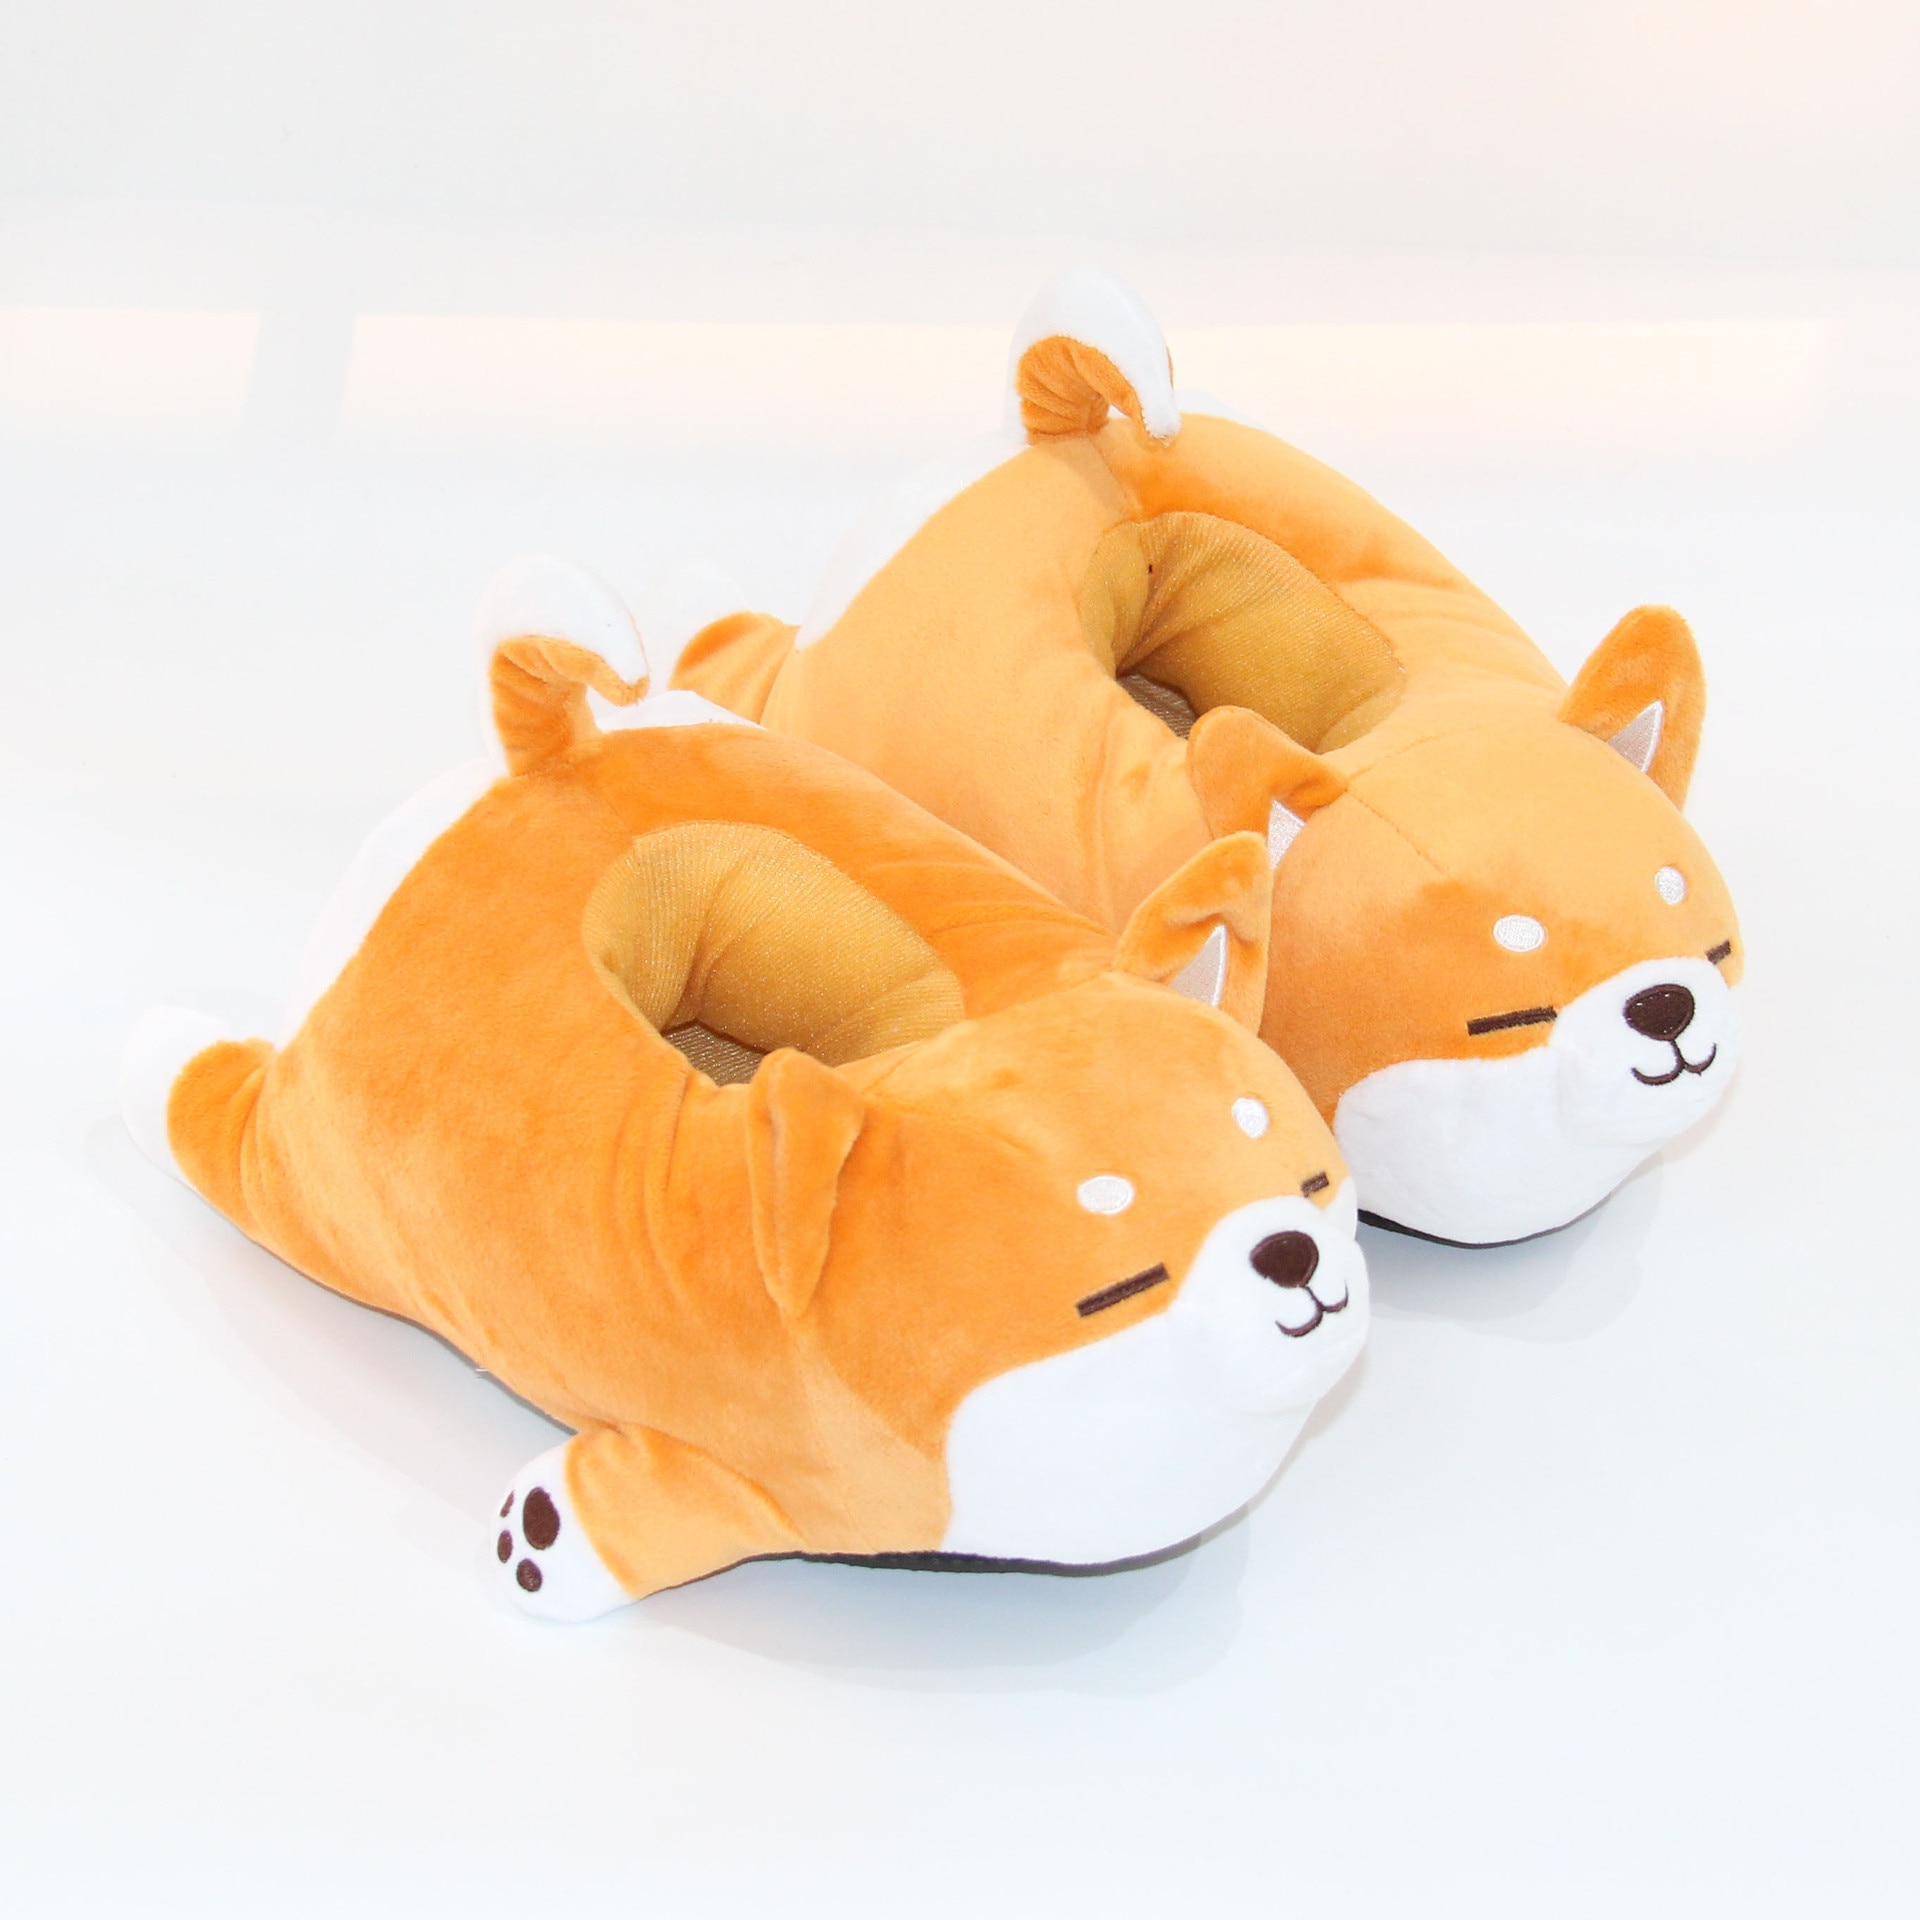 Japanese Shiba Inu Themed Cute and Soft Indoor Slippers Shoes & Slippers